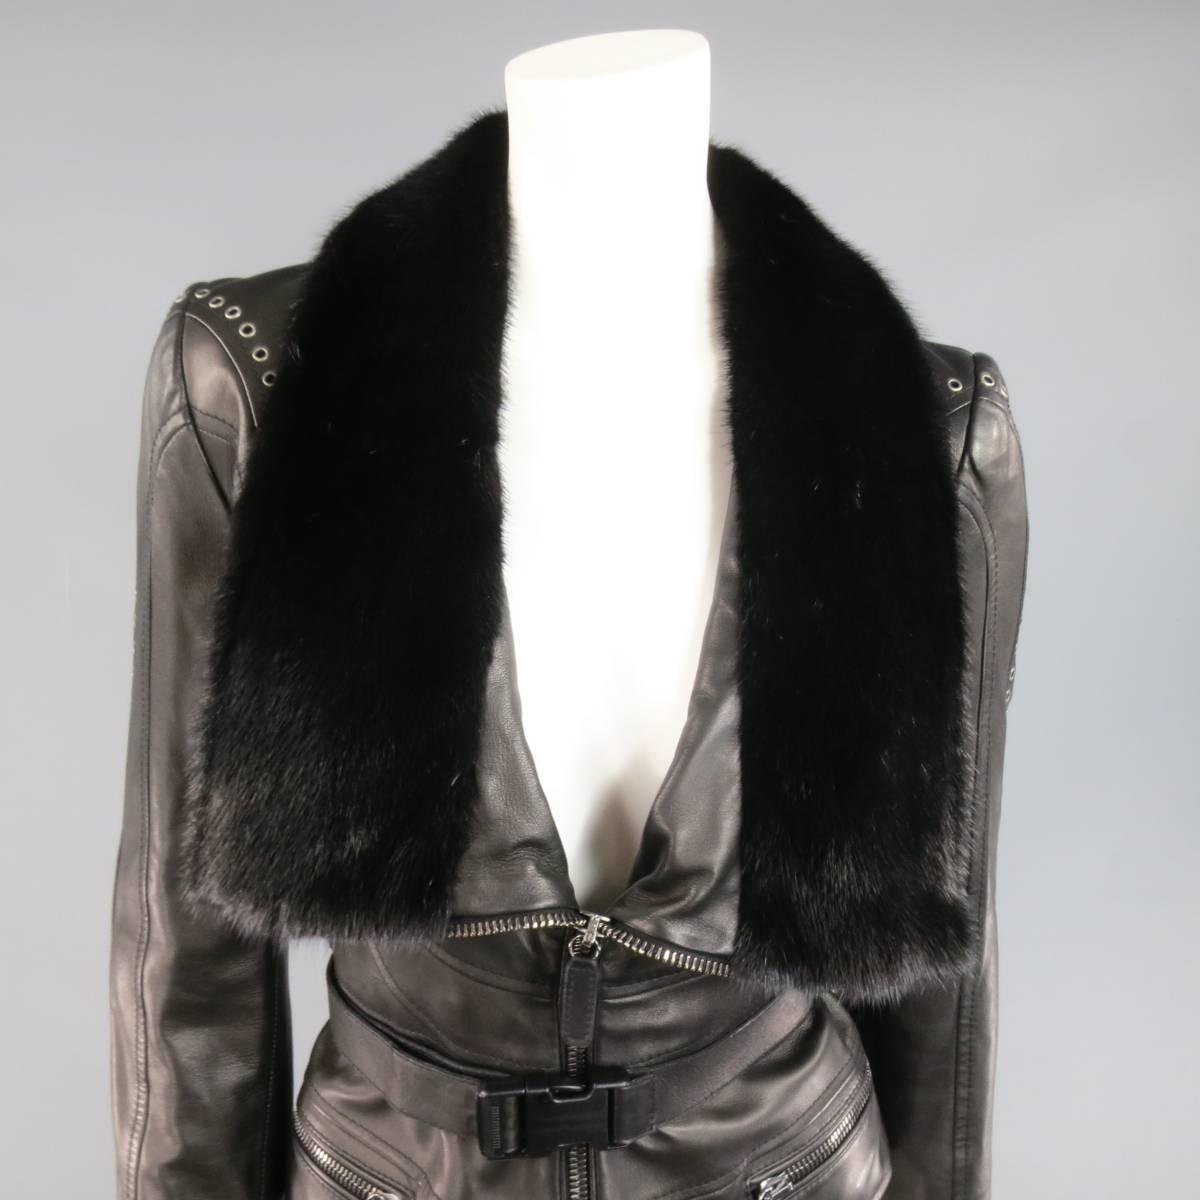 This fabulous EMANUEL UNGARO cropped biker jacket comes in a buttery soft black leather and features a long black mink fur collar lapel, zip up front, double zip pockets, decorative seam details, optional leather buckle belt, and grommet